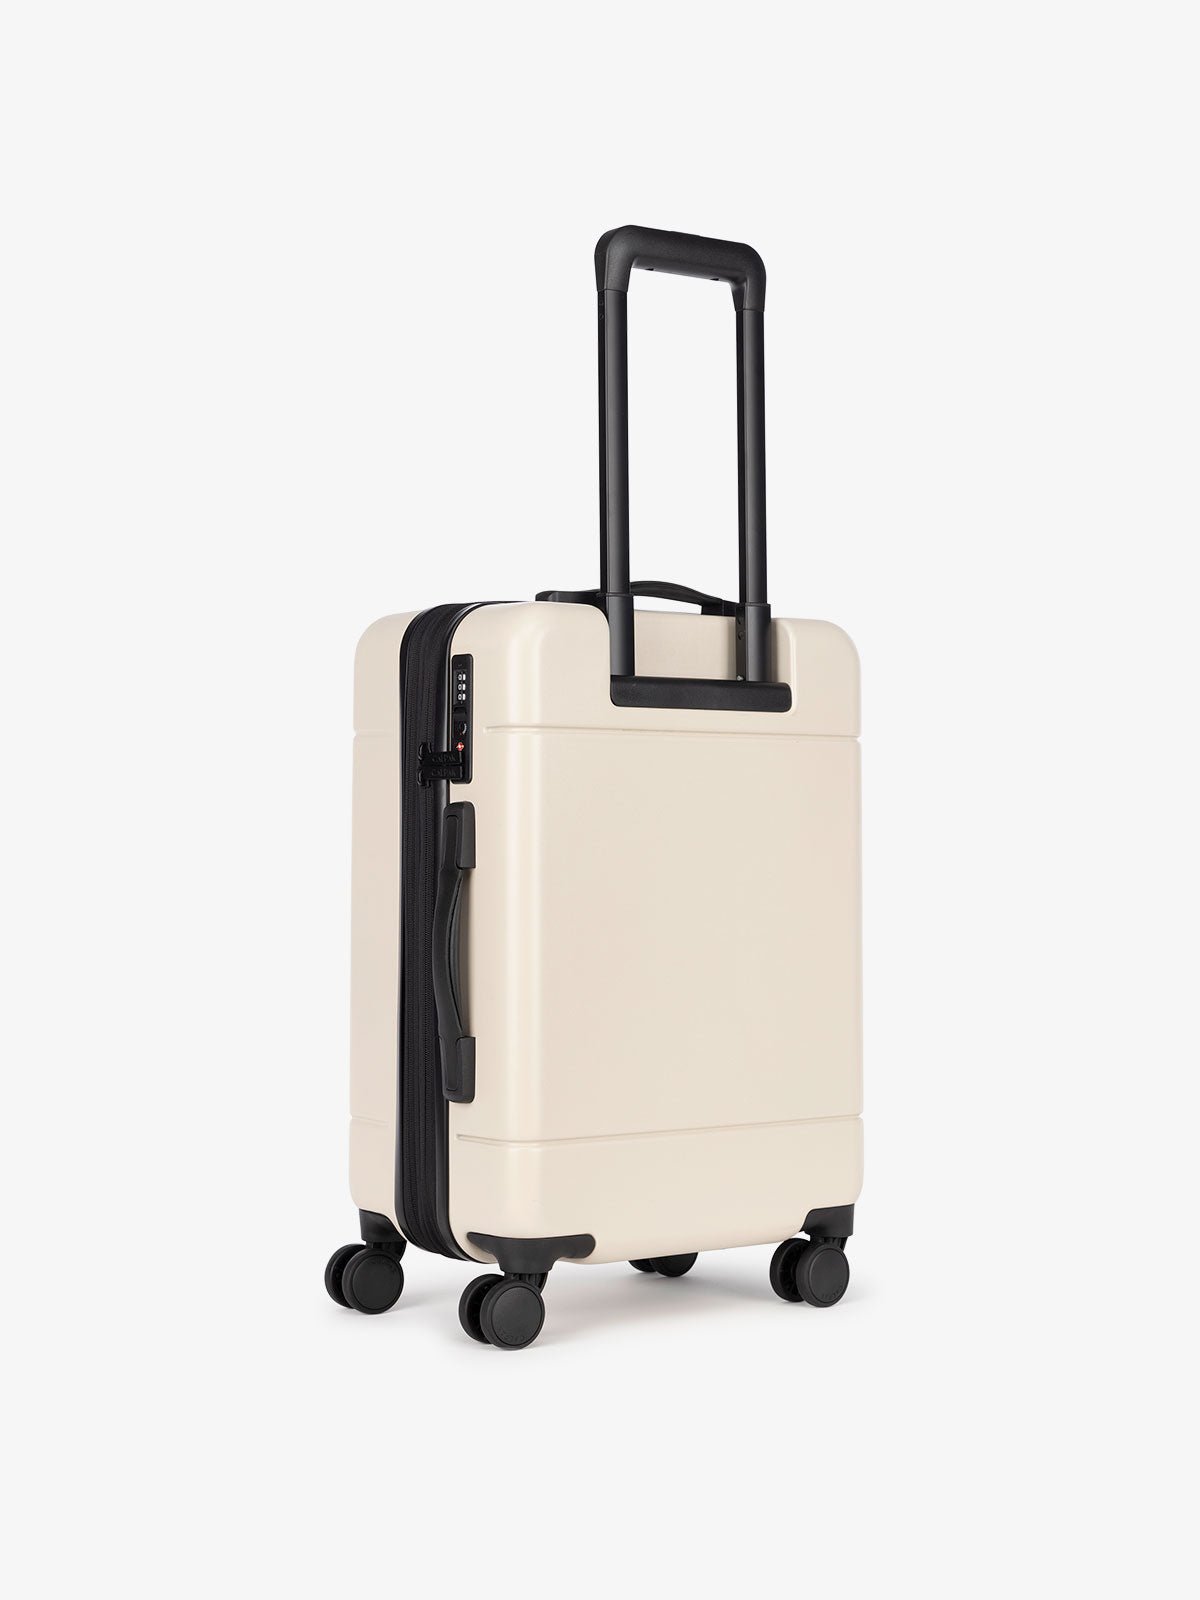 CALPAK Hue lightweight carry-on suitcase with laptop pocket in cream linen color